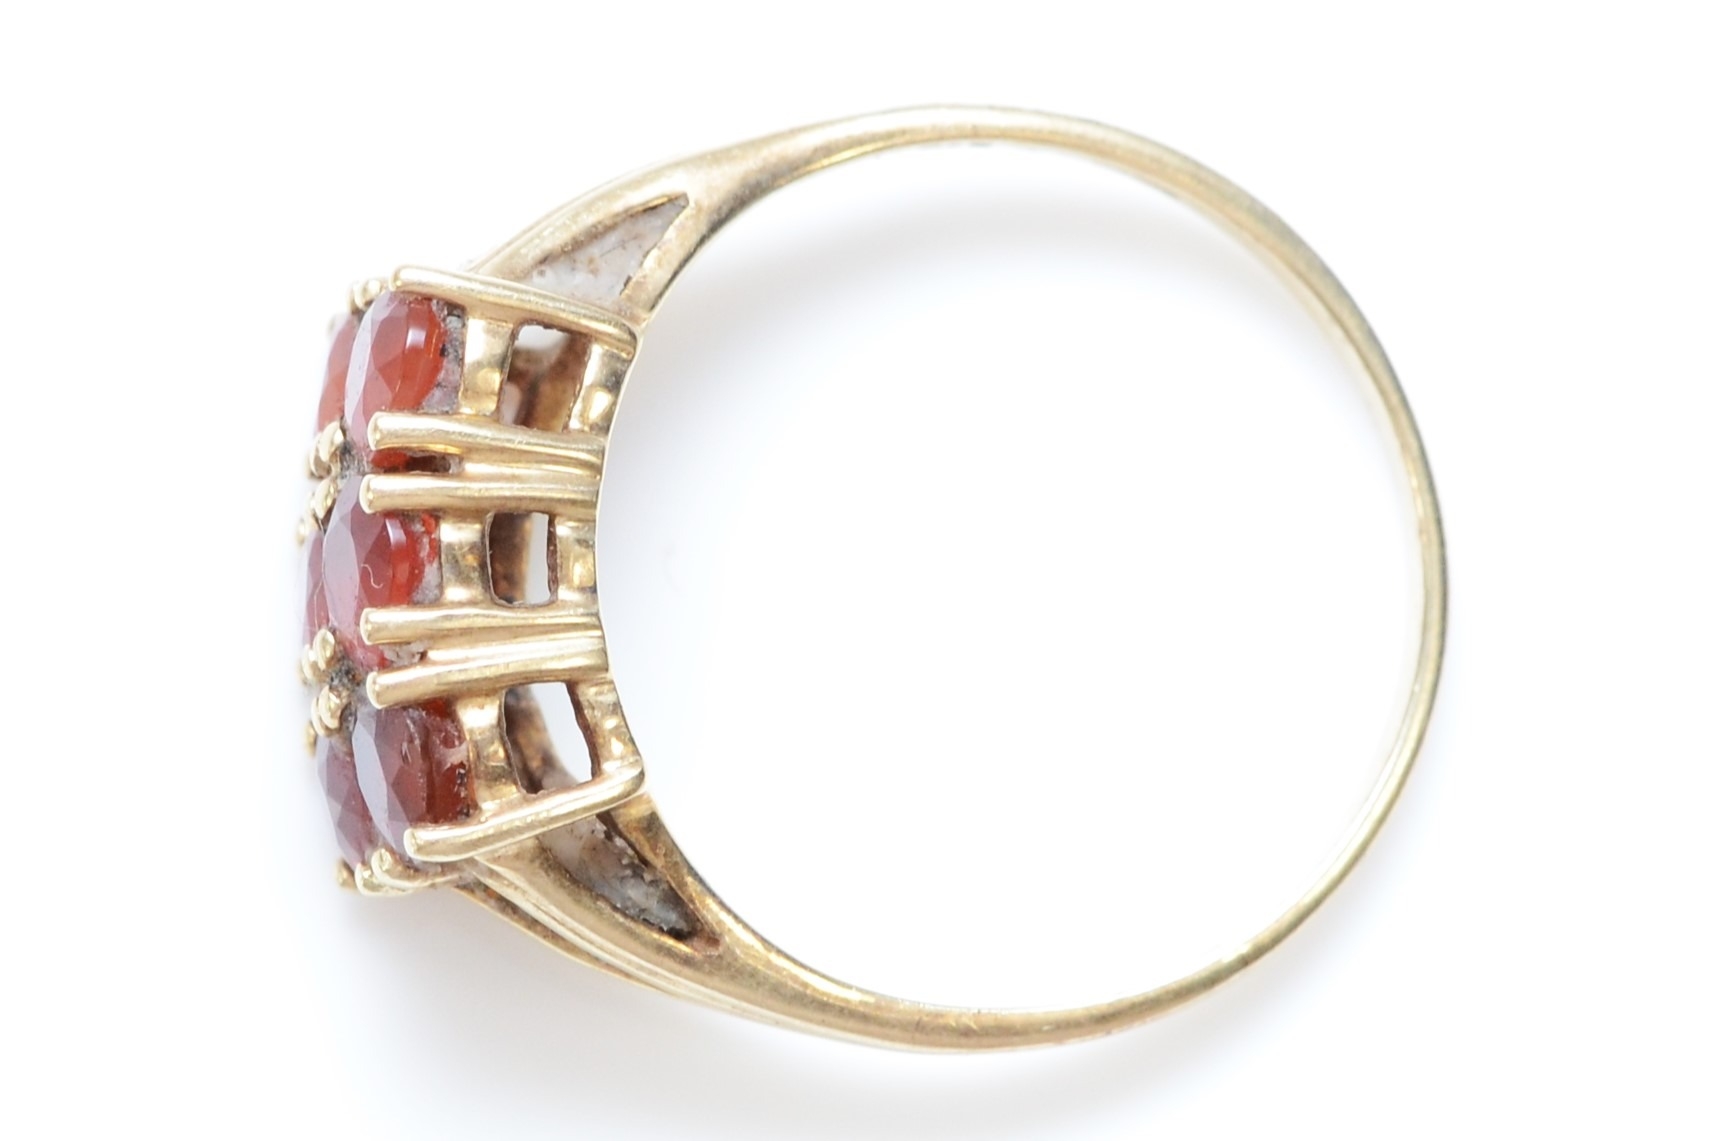 A 9ct gold and six orange gemstone ring, N 1/2, 2.4gm - Image 2 of 2